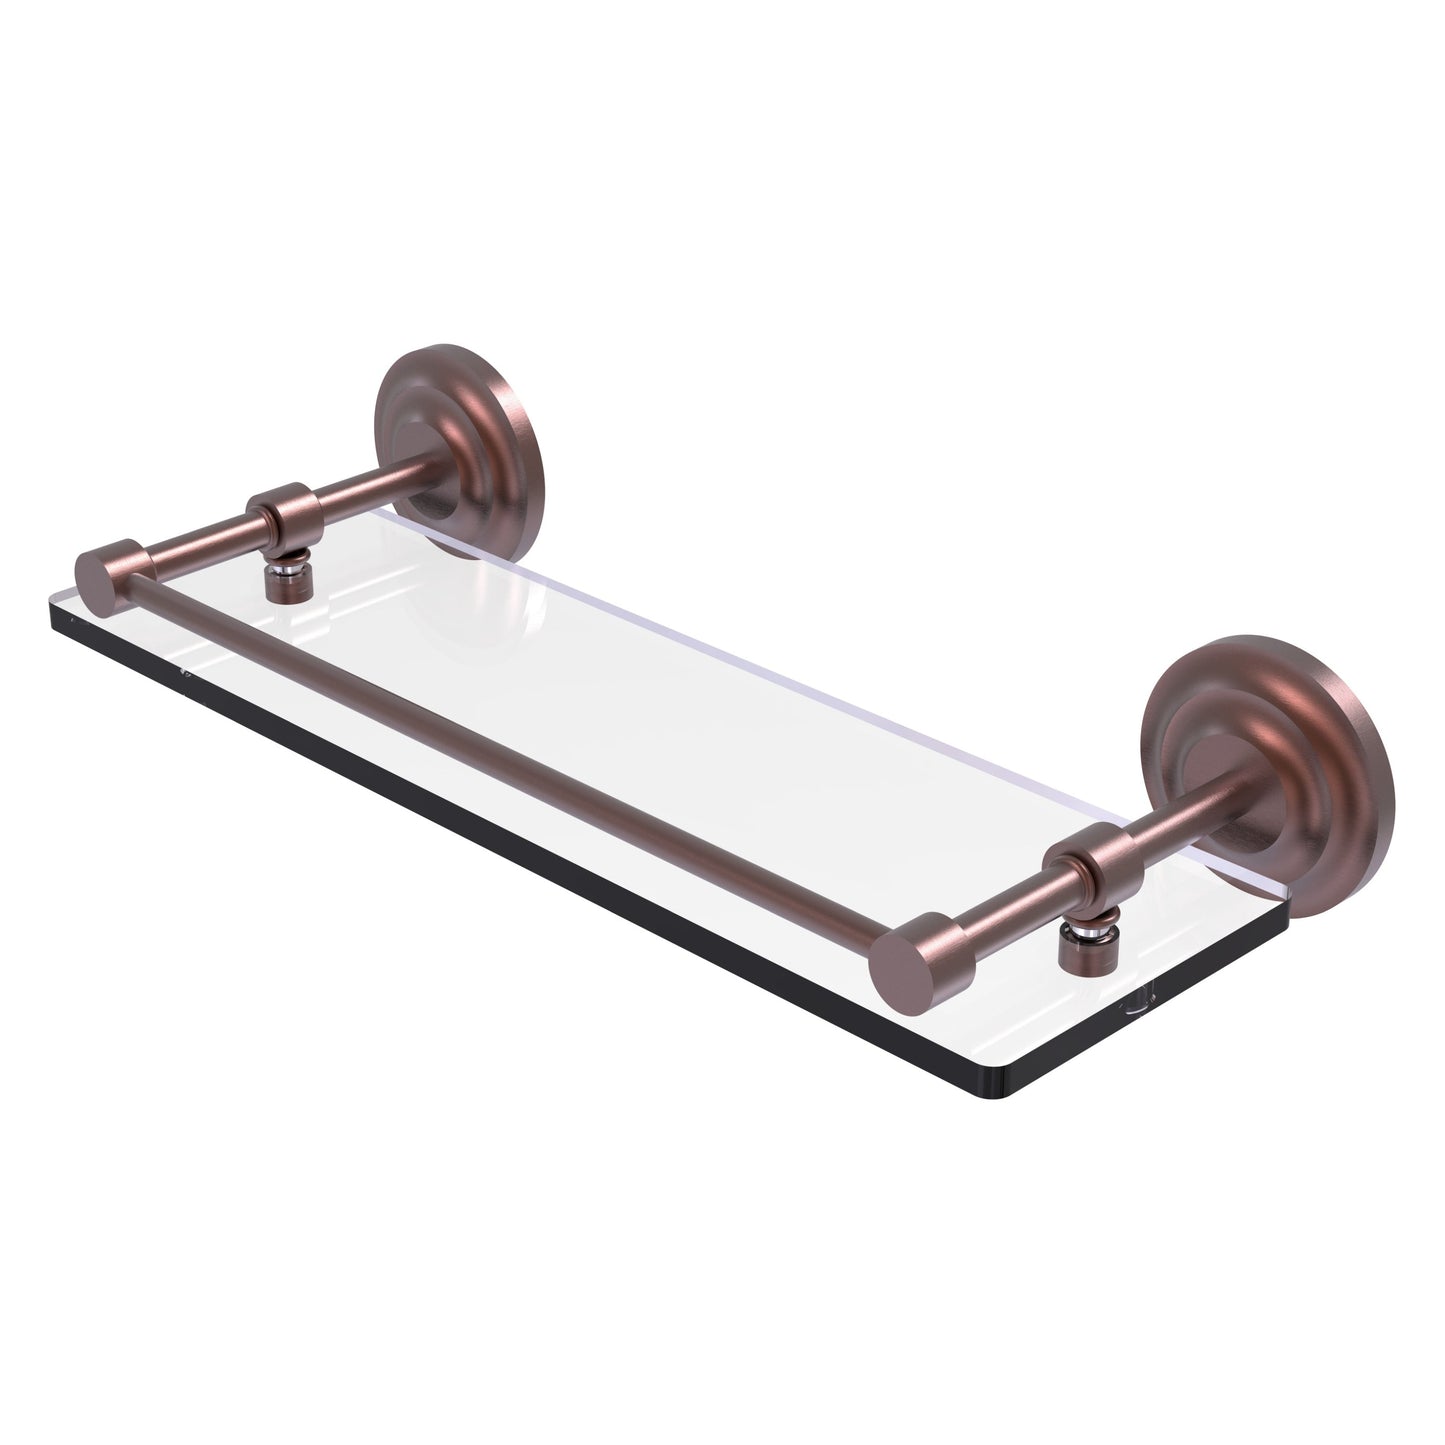 Allied Brass Que New 16" x 5" Antique Copper Solid Brass 16-Inch Tempered Glass Shelf With Gallery Rail